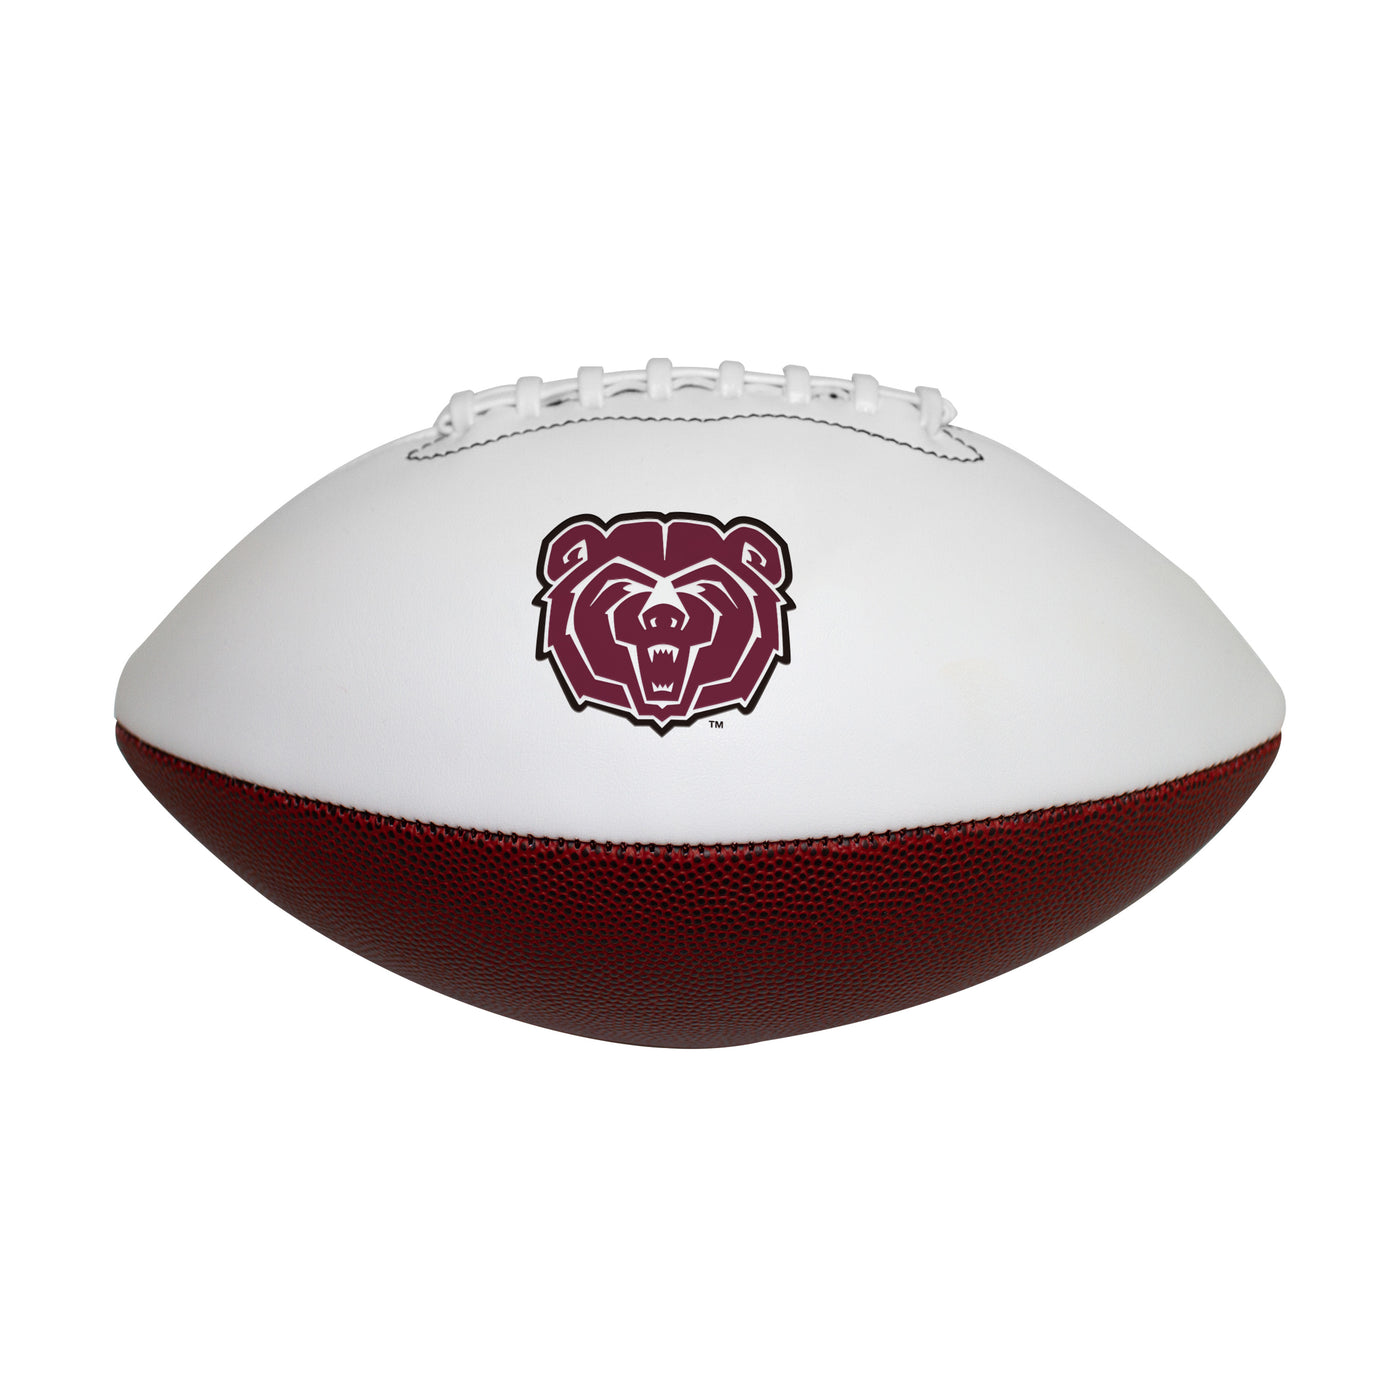 MO State Official-Size Autograph Football